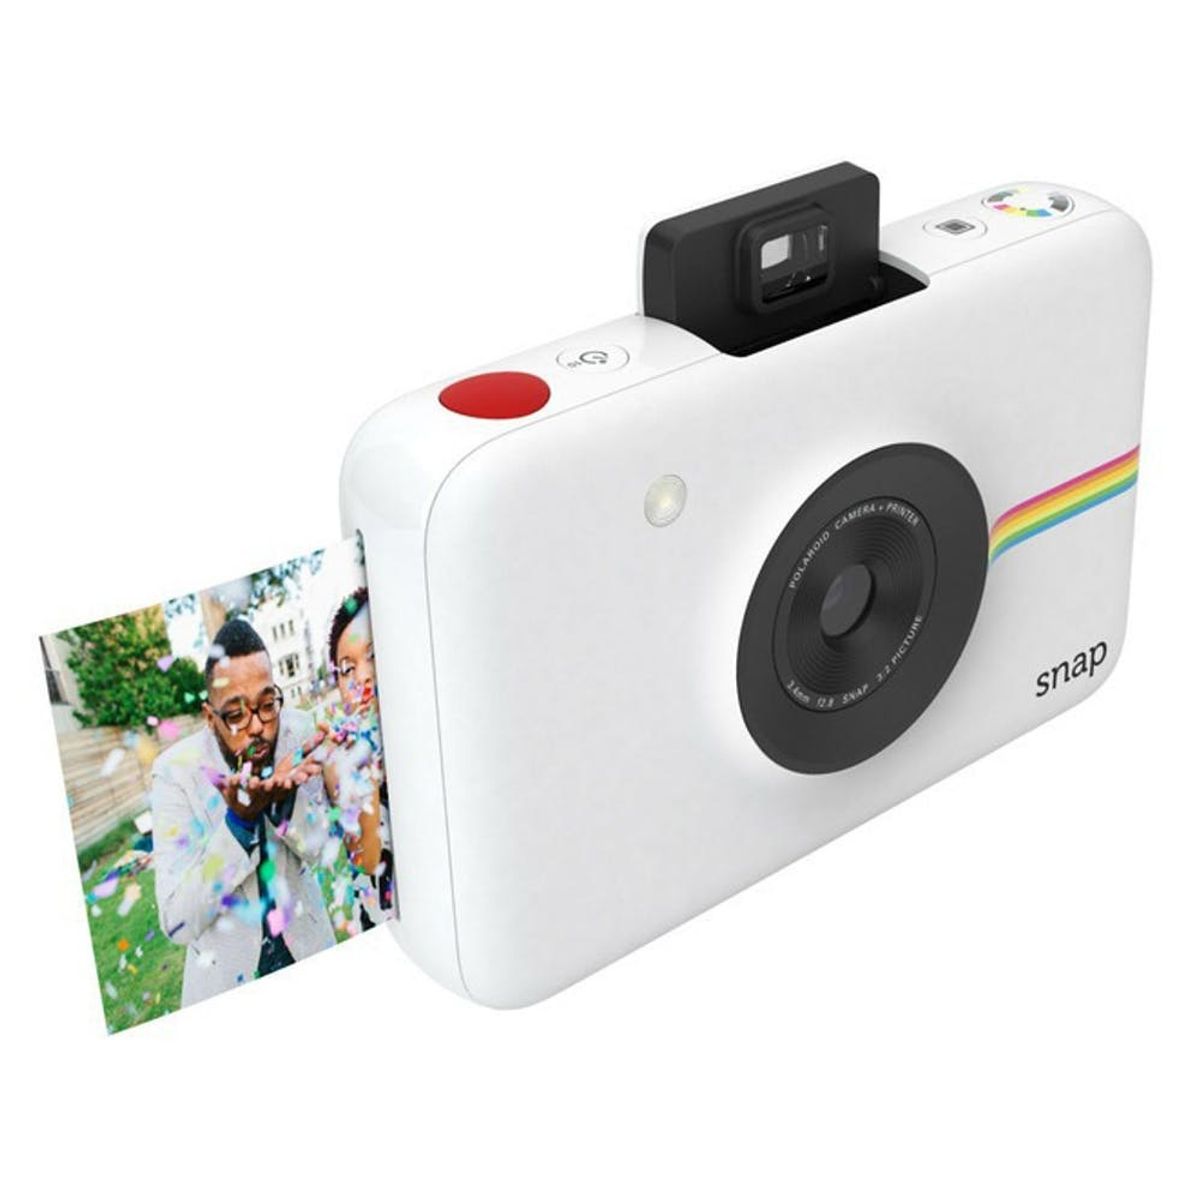 Polaroid’s Just-Released Camera Will Make You Really Nostalgic